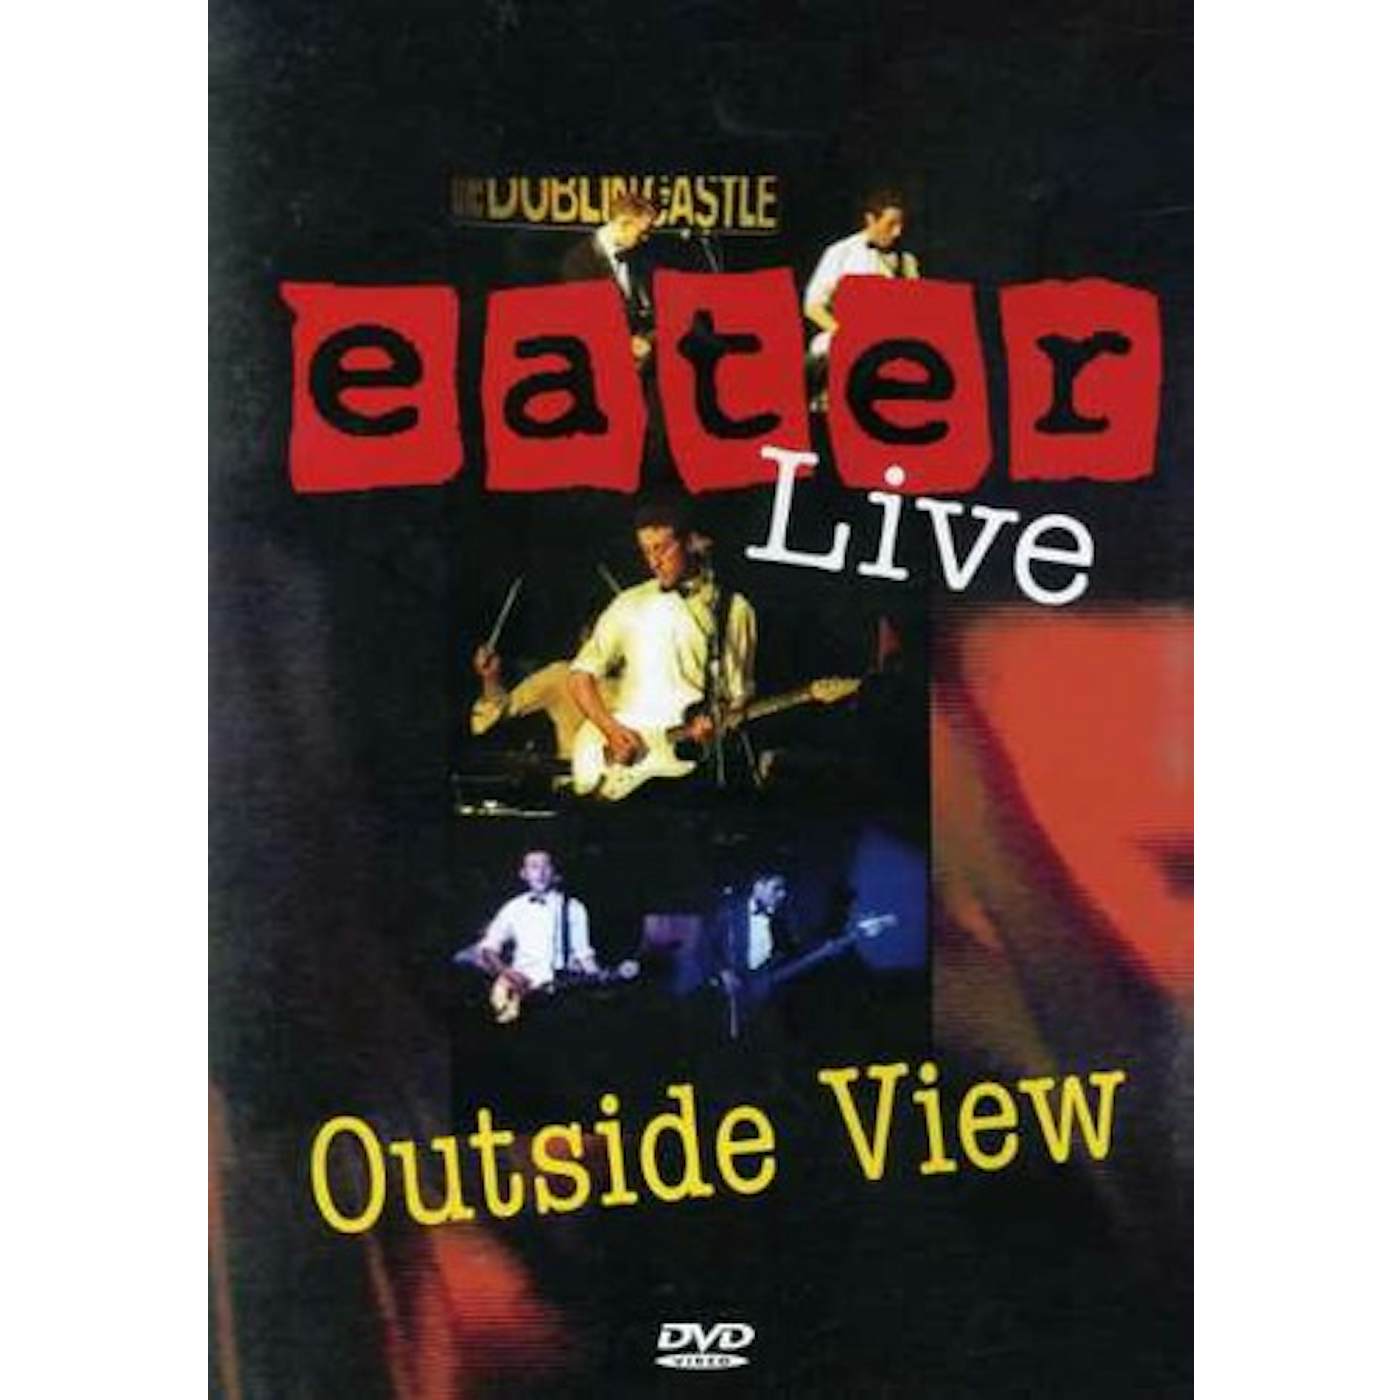 OUTSIDE VIEW: EATER LIVE DVD